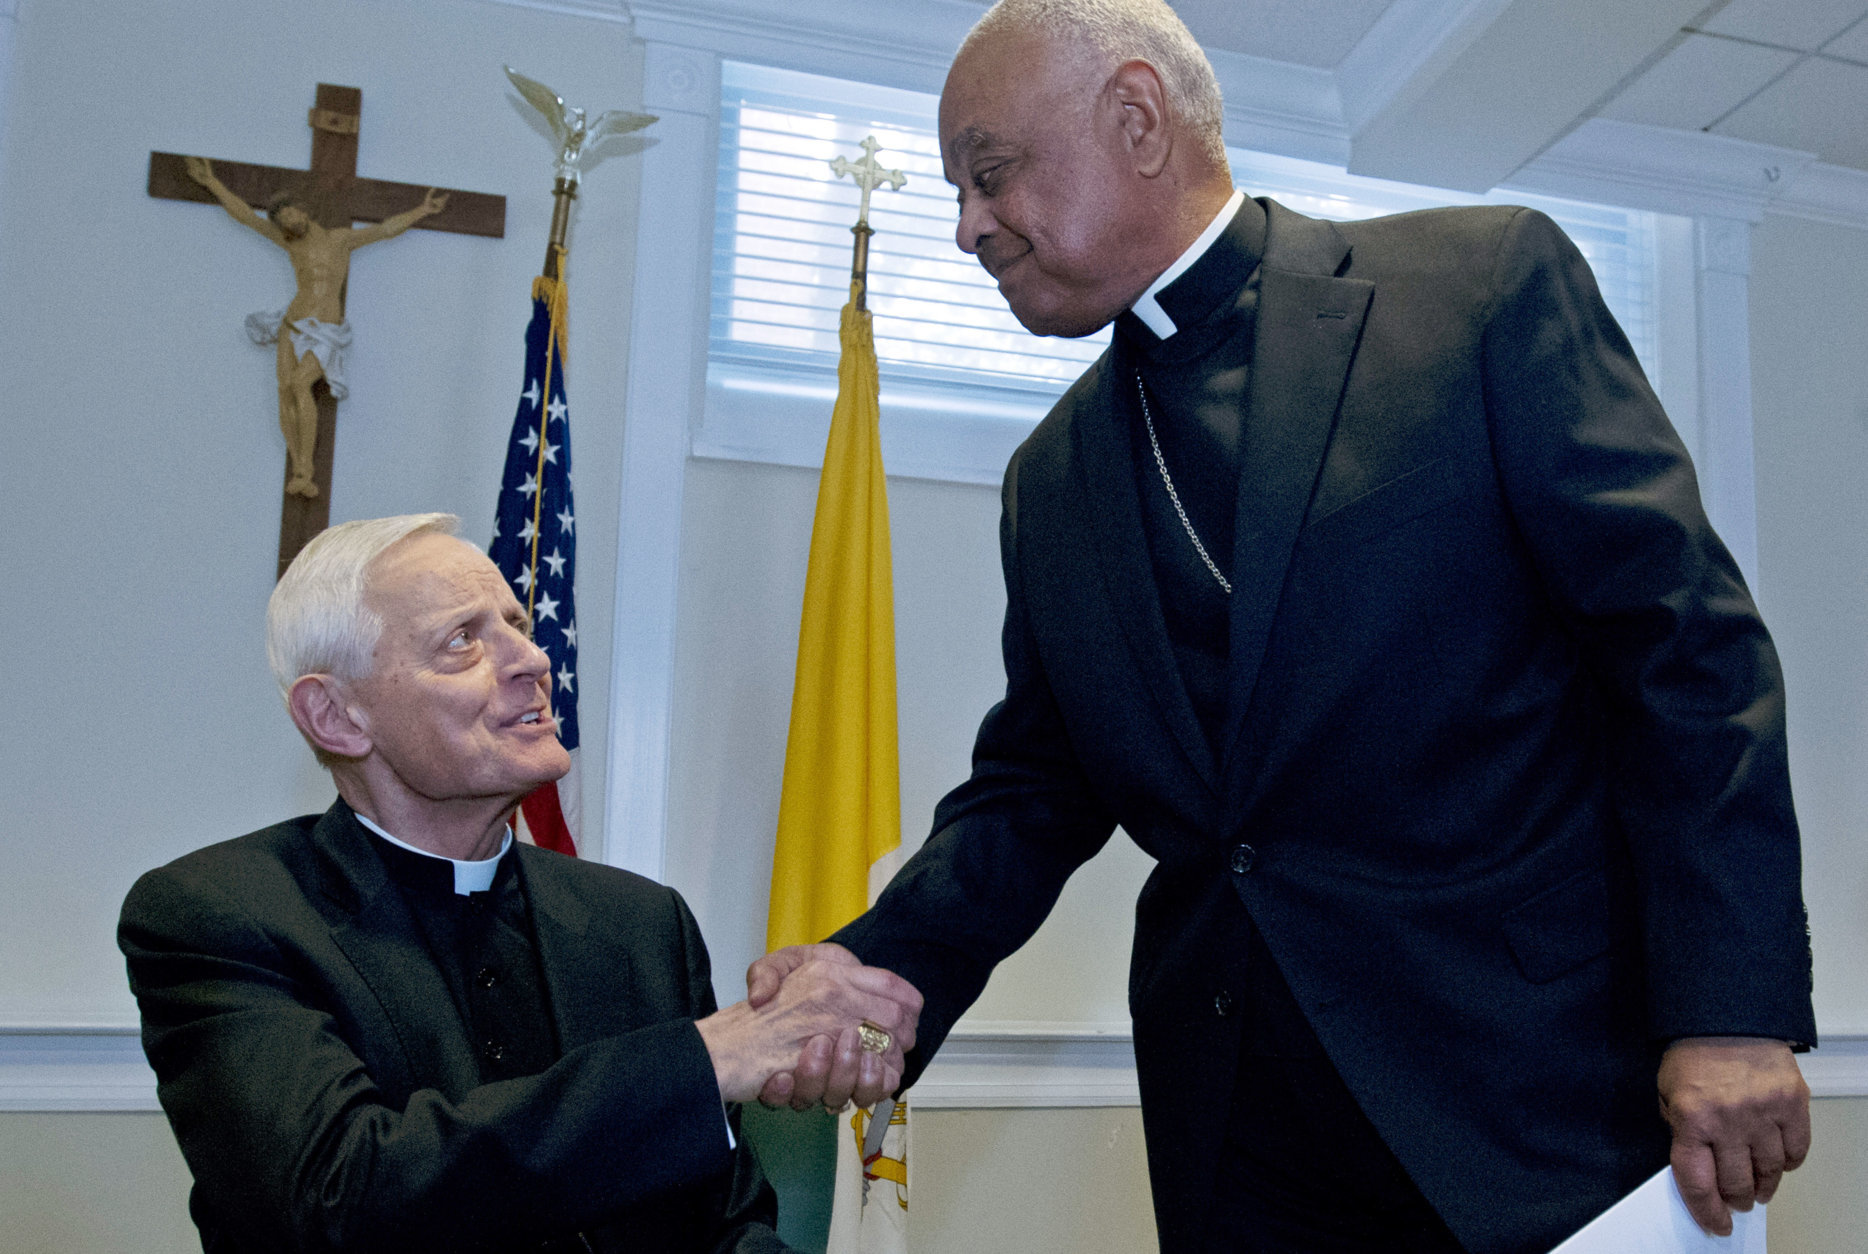 Archbishop designated by Pope Francis to the Archdiocese of Washington, Archbishop Wilton D. Gregory, right, shake hands with Cardinal Donald Wuerl, during the news conference at Washington Archdiocesan Pastoral Center in Hyattsville, Md., Thursday, April 4, 2019. Archbishop-designate Gregory will succeed Cardinal Donald Wuerl. (AP Photo/Jose Luis Magana)